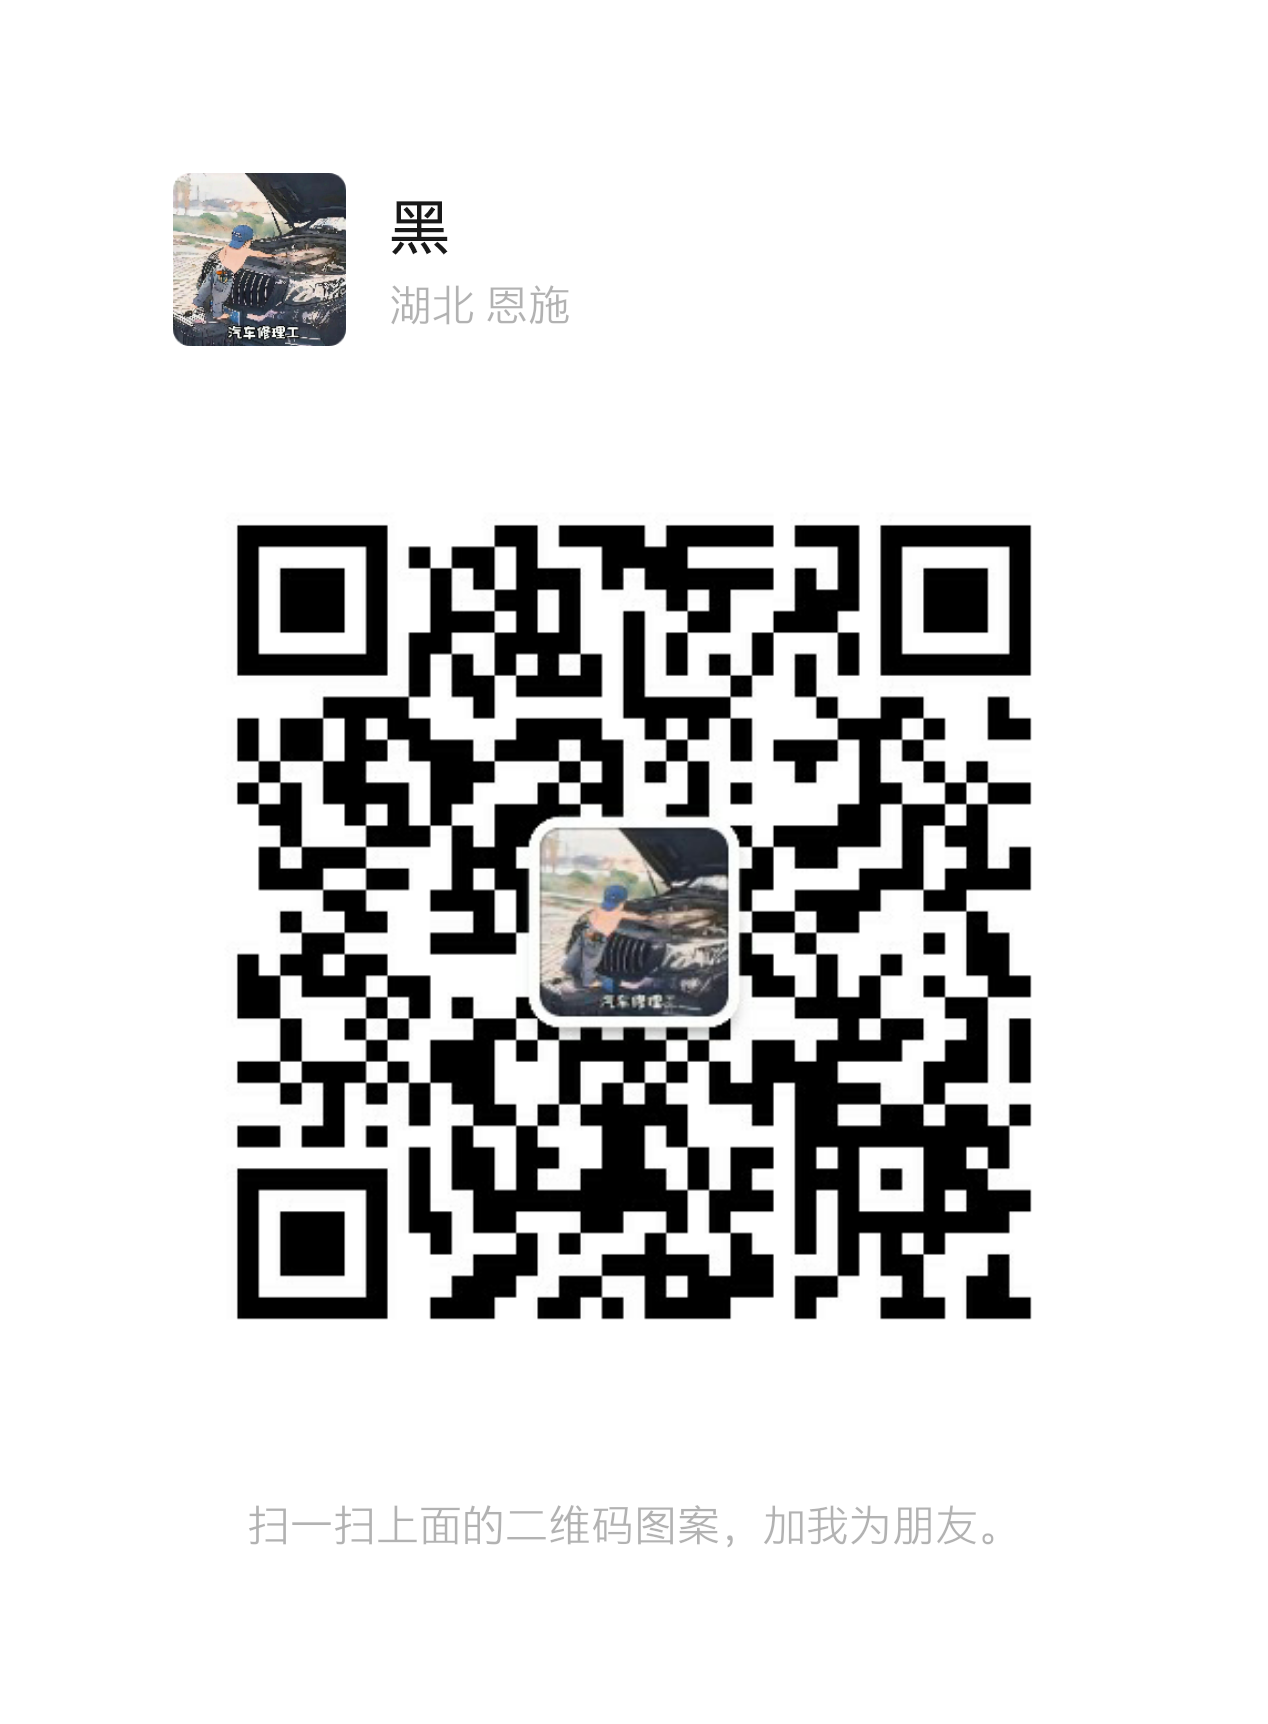 mmqrcode1685608869817.png